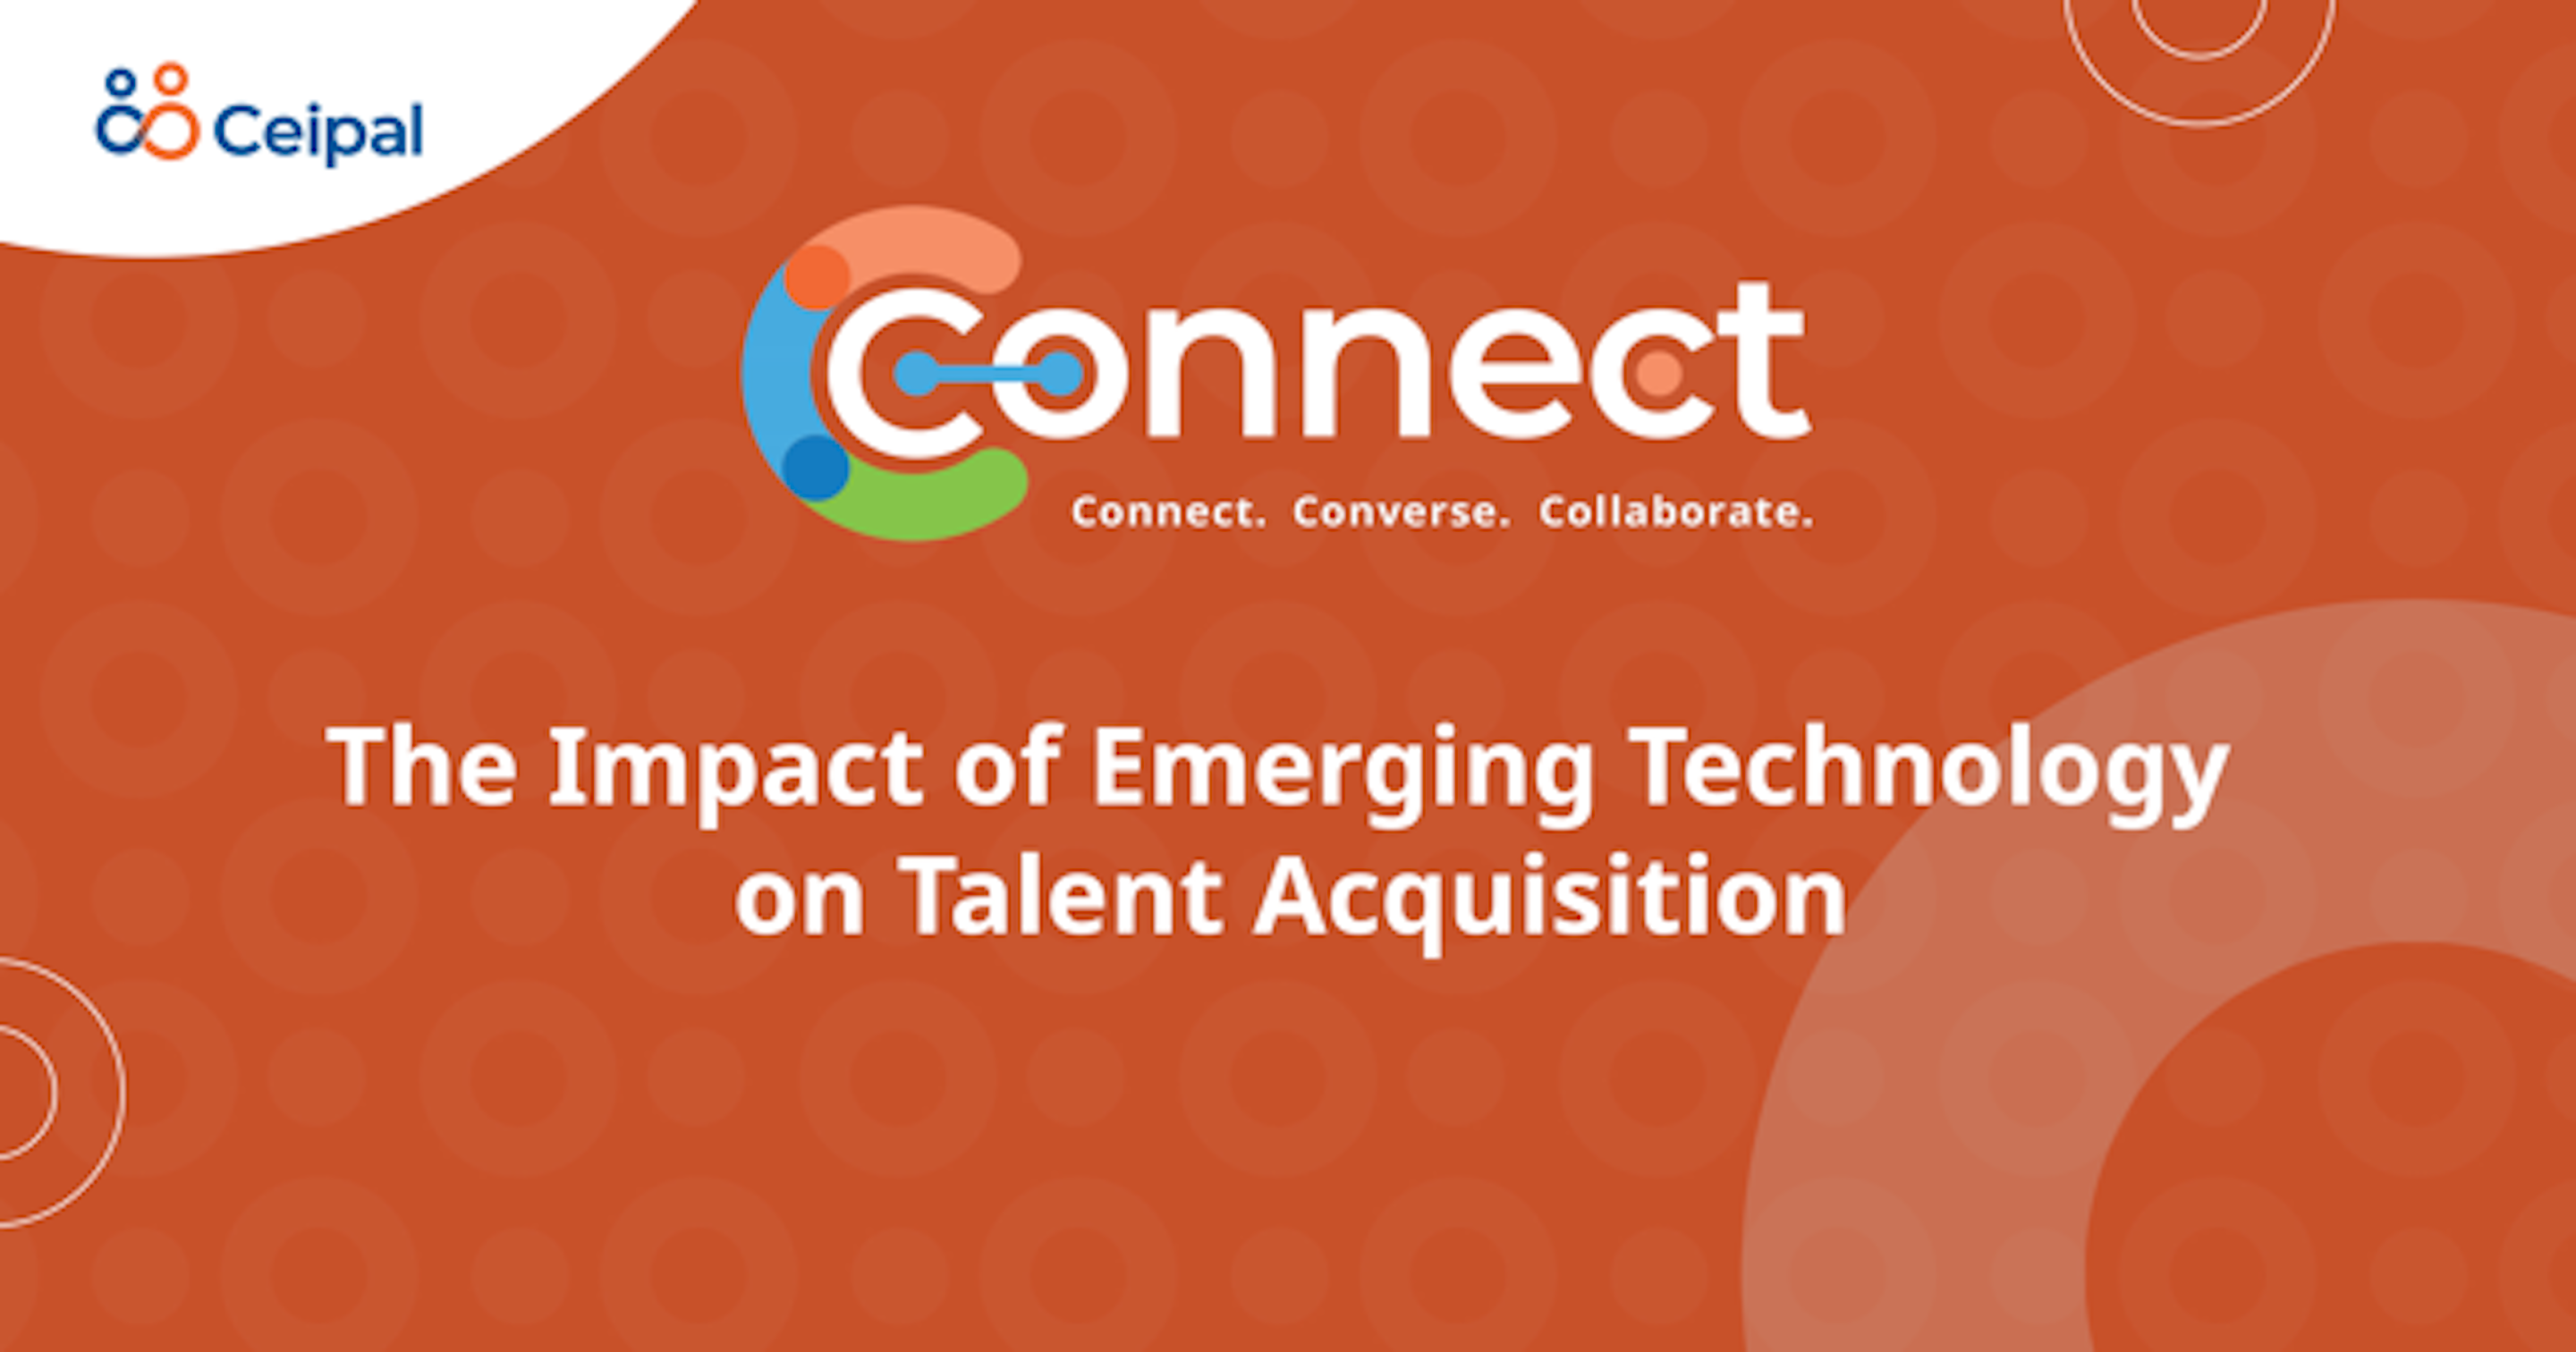 The Impact of Emerging Technology on Talent Acquisition